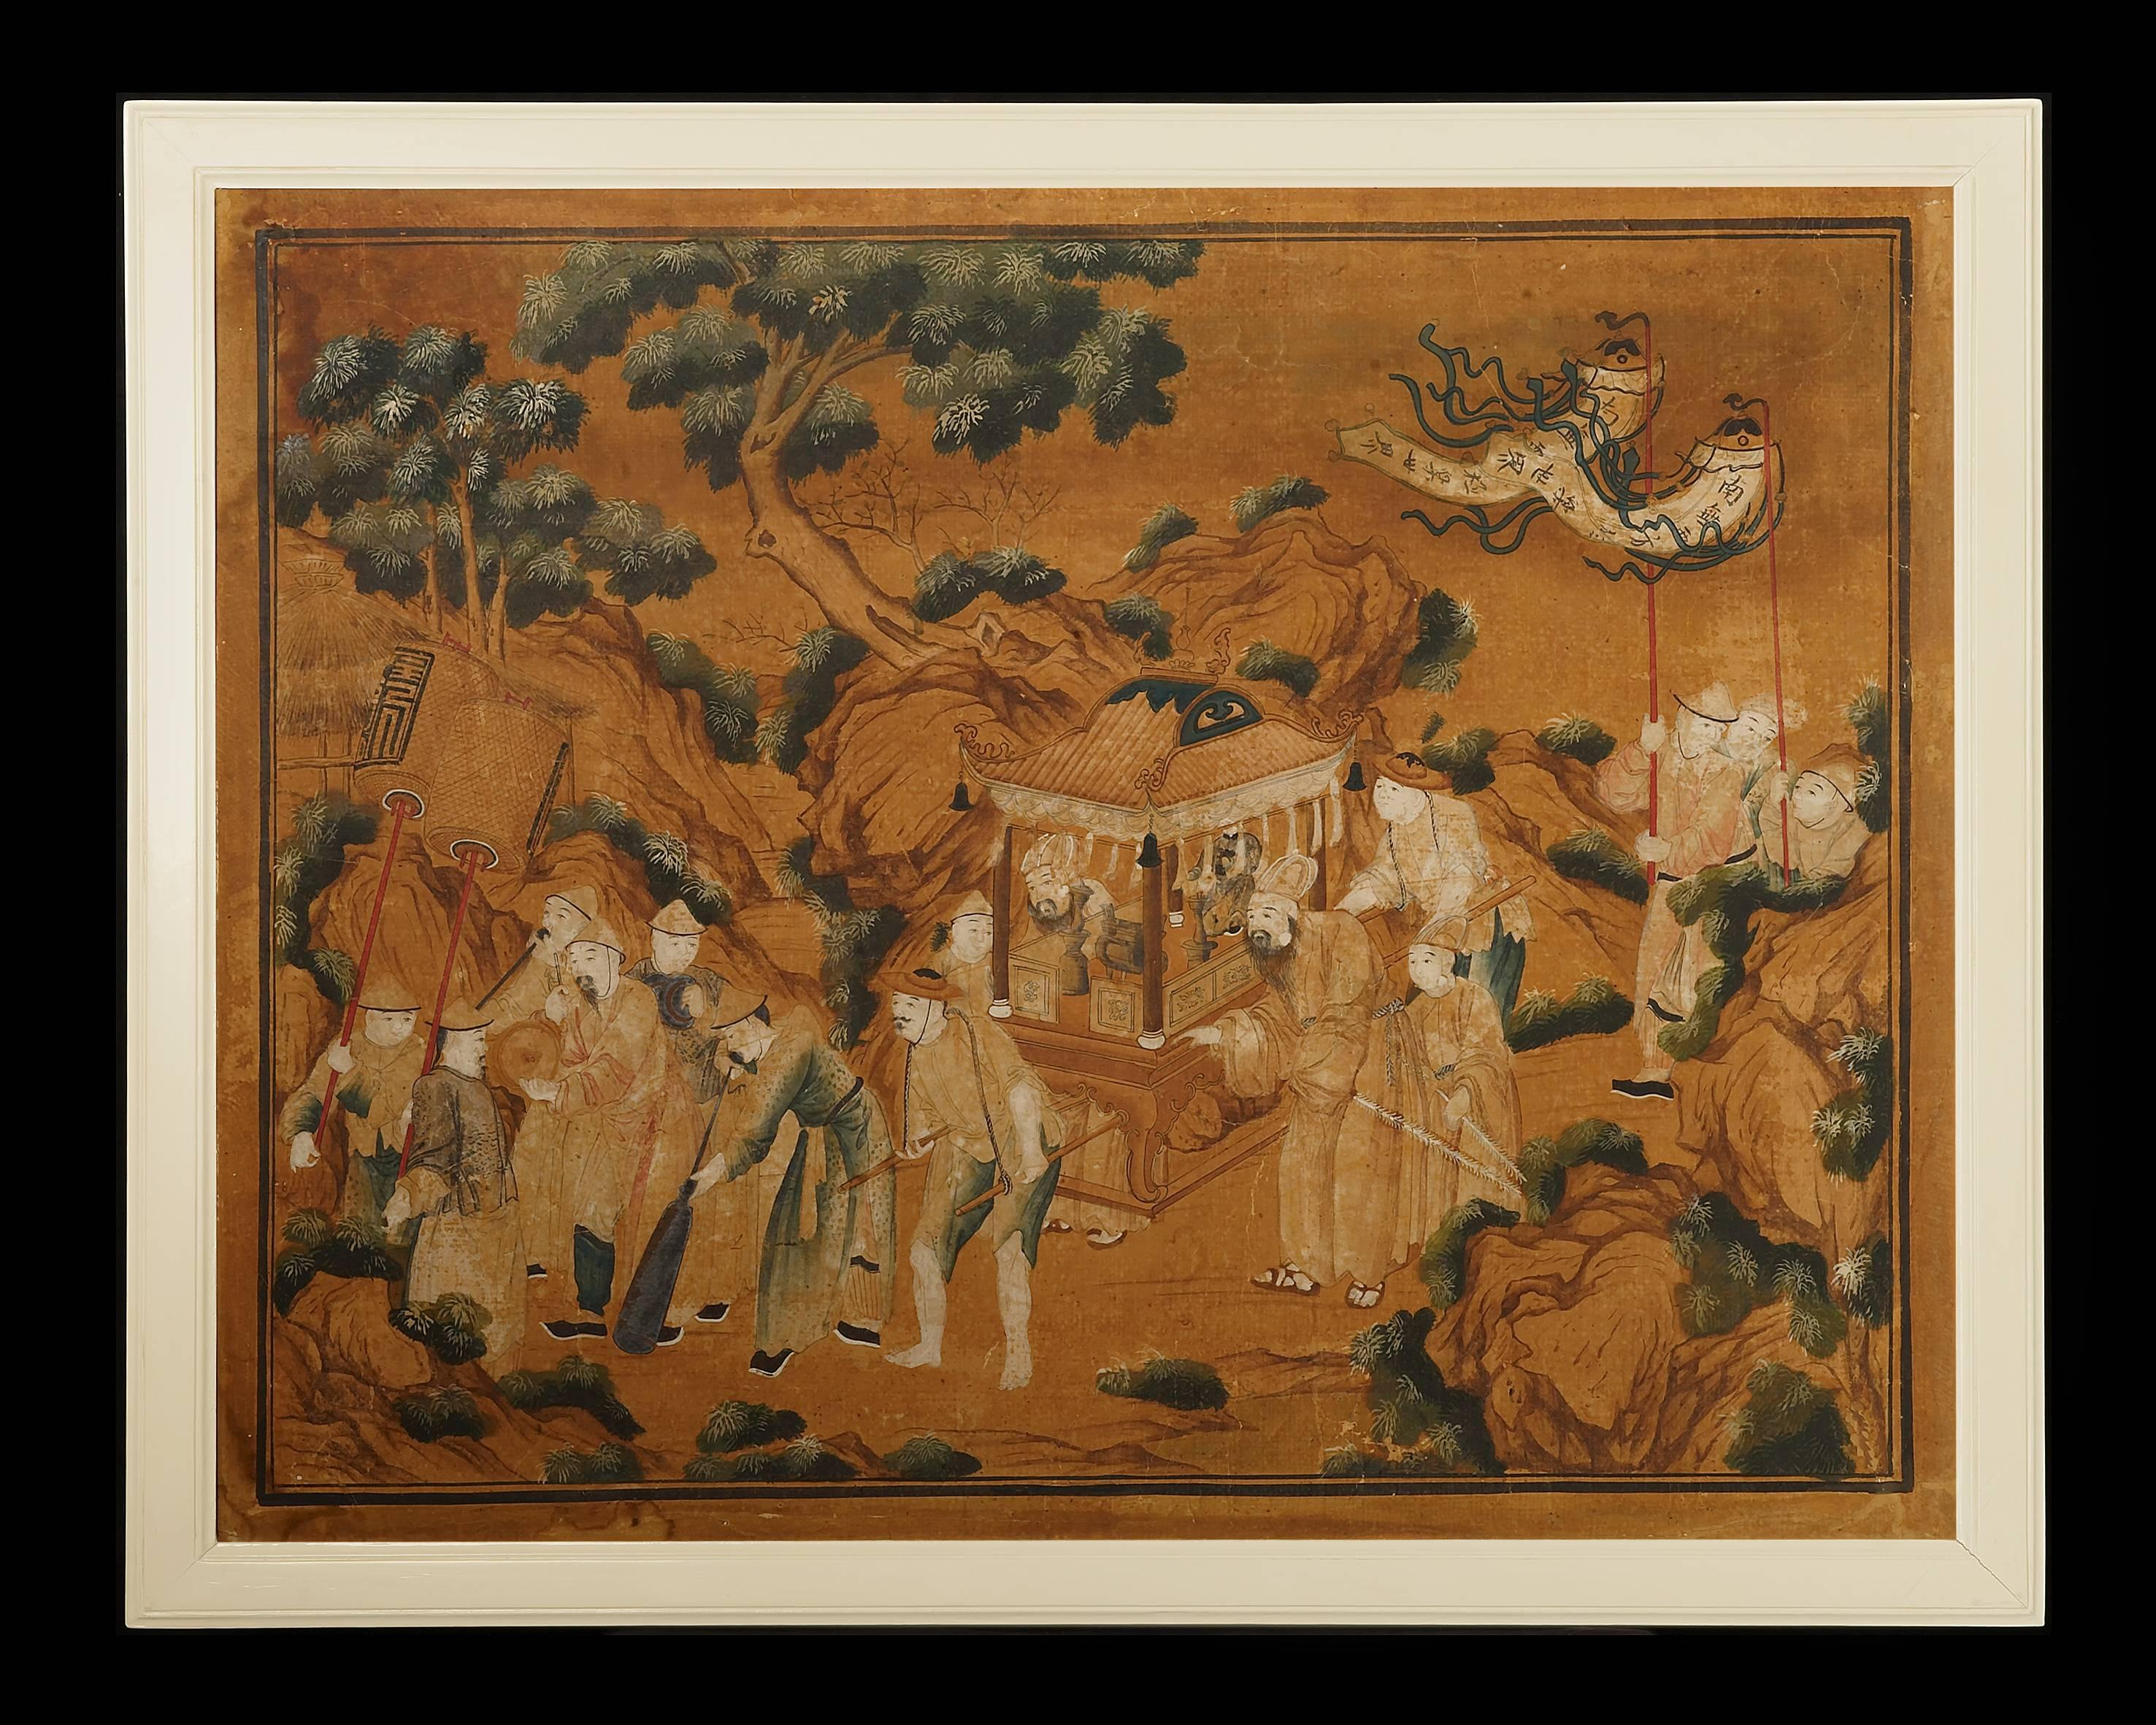 A group of four (of eight) Chinese paintings, two depicting people at leisure, one depicting locals posting announcements and one depicting figures in battle.

Ink and color on paper.